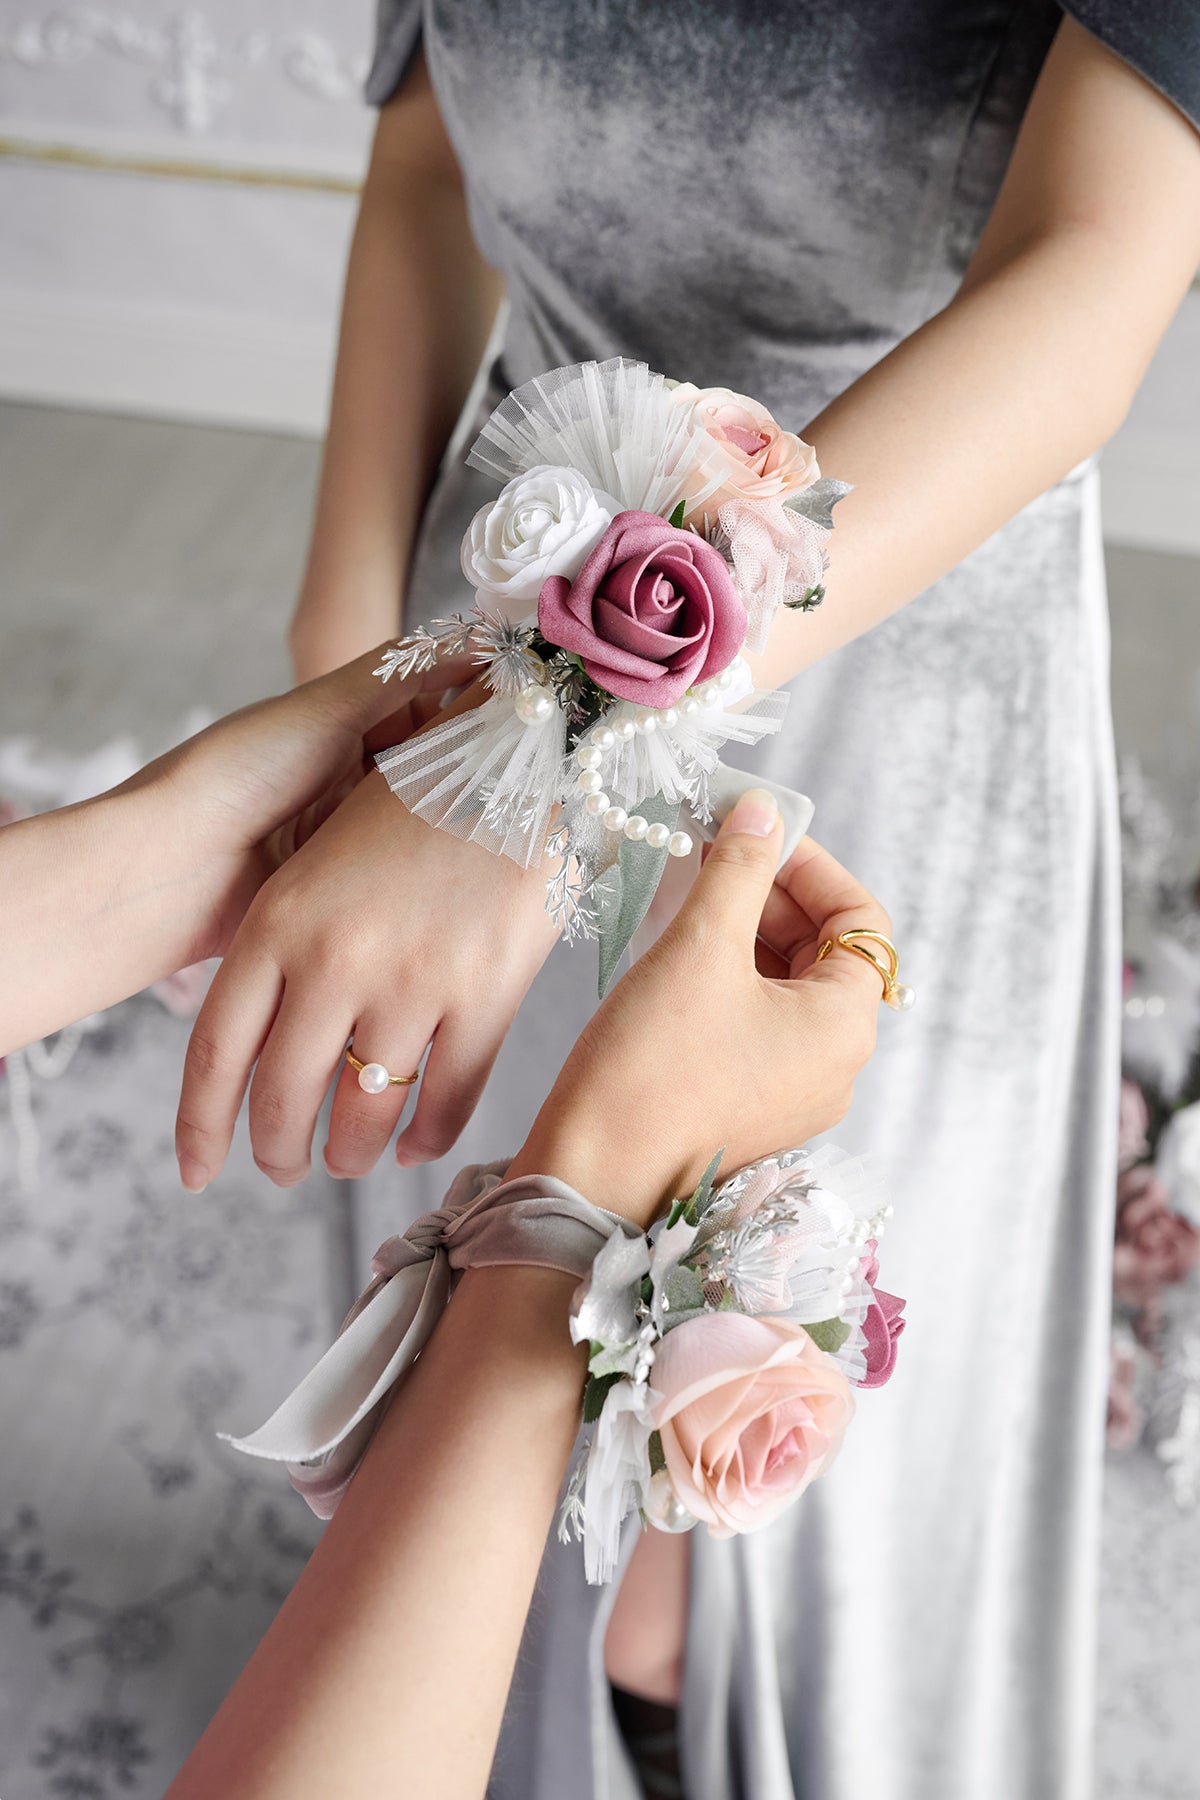 Wrist and Shoulder Corsages in Dusky Rose & Silver